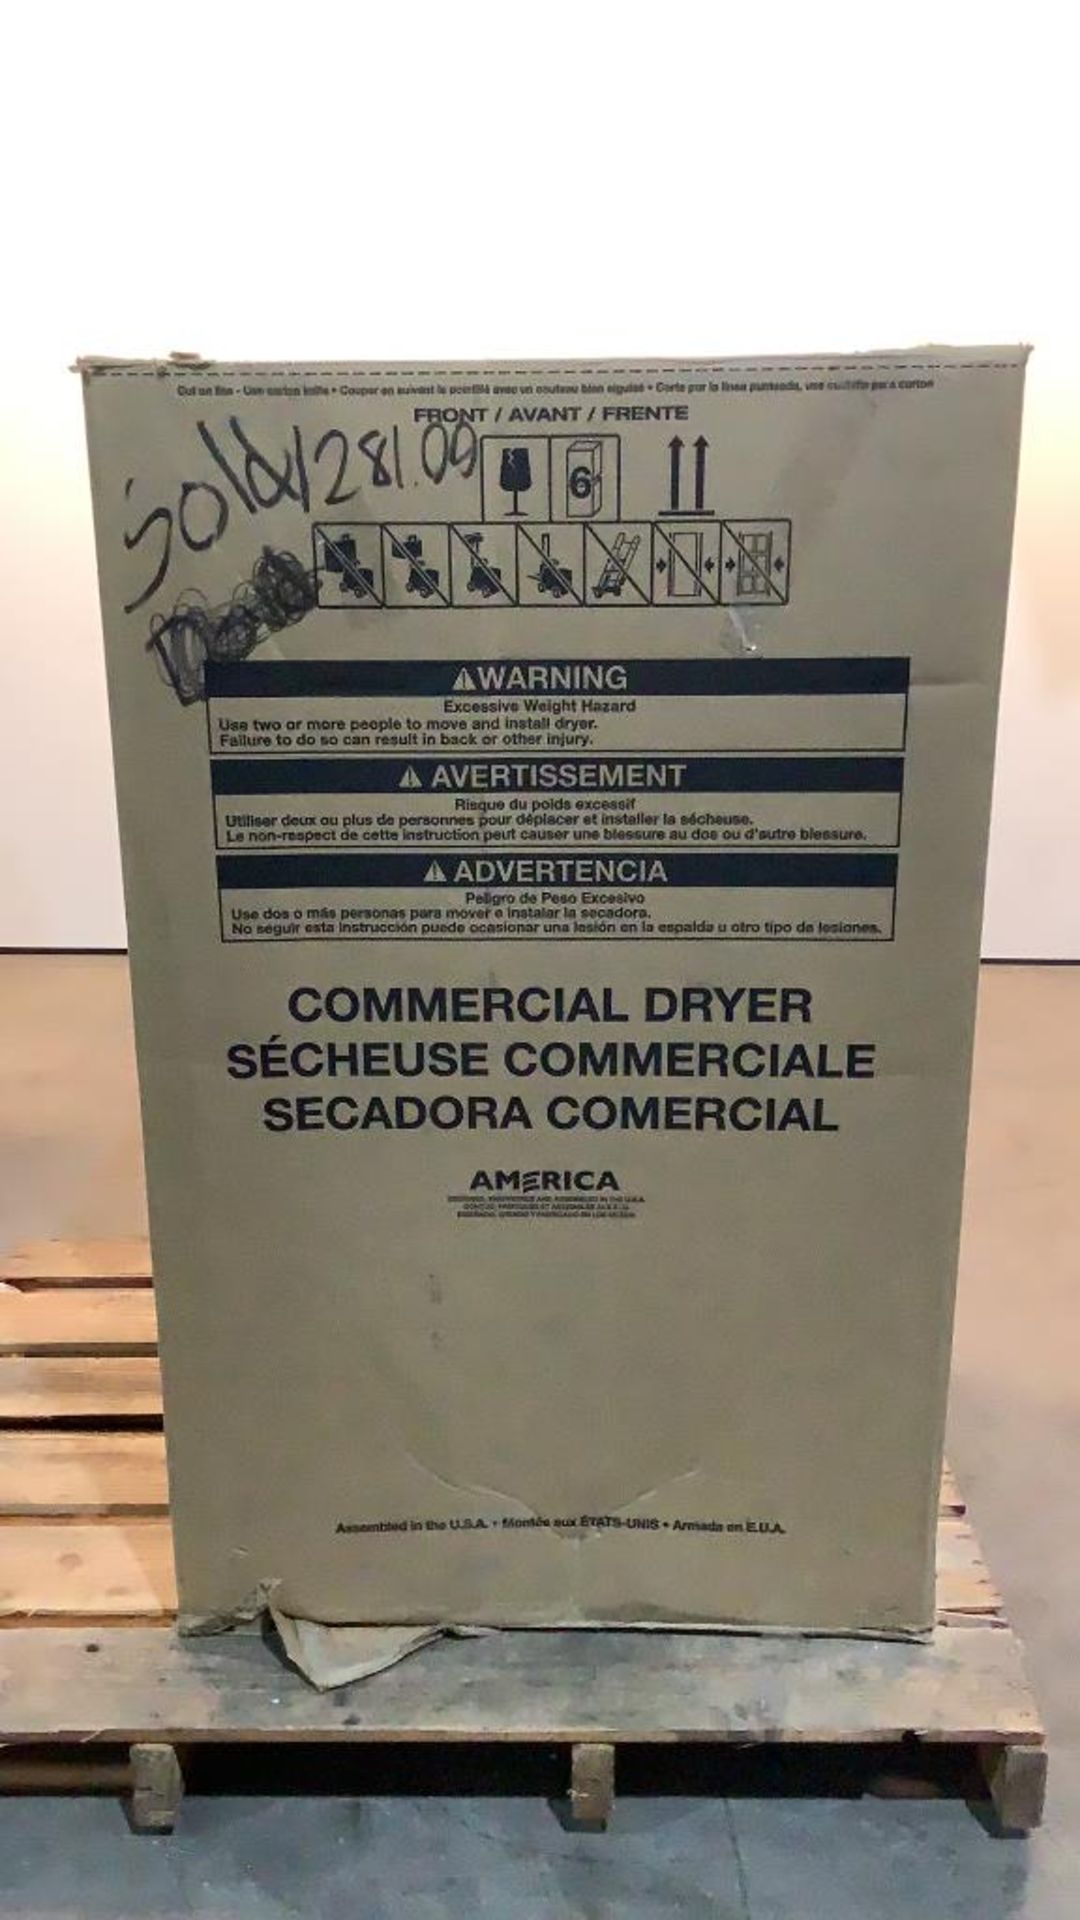 *New* Whirlpool Commerical Gas Dryer CGD9160GW - Image 17 of 20